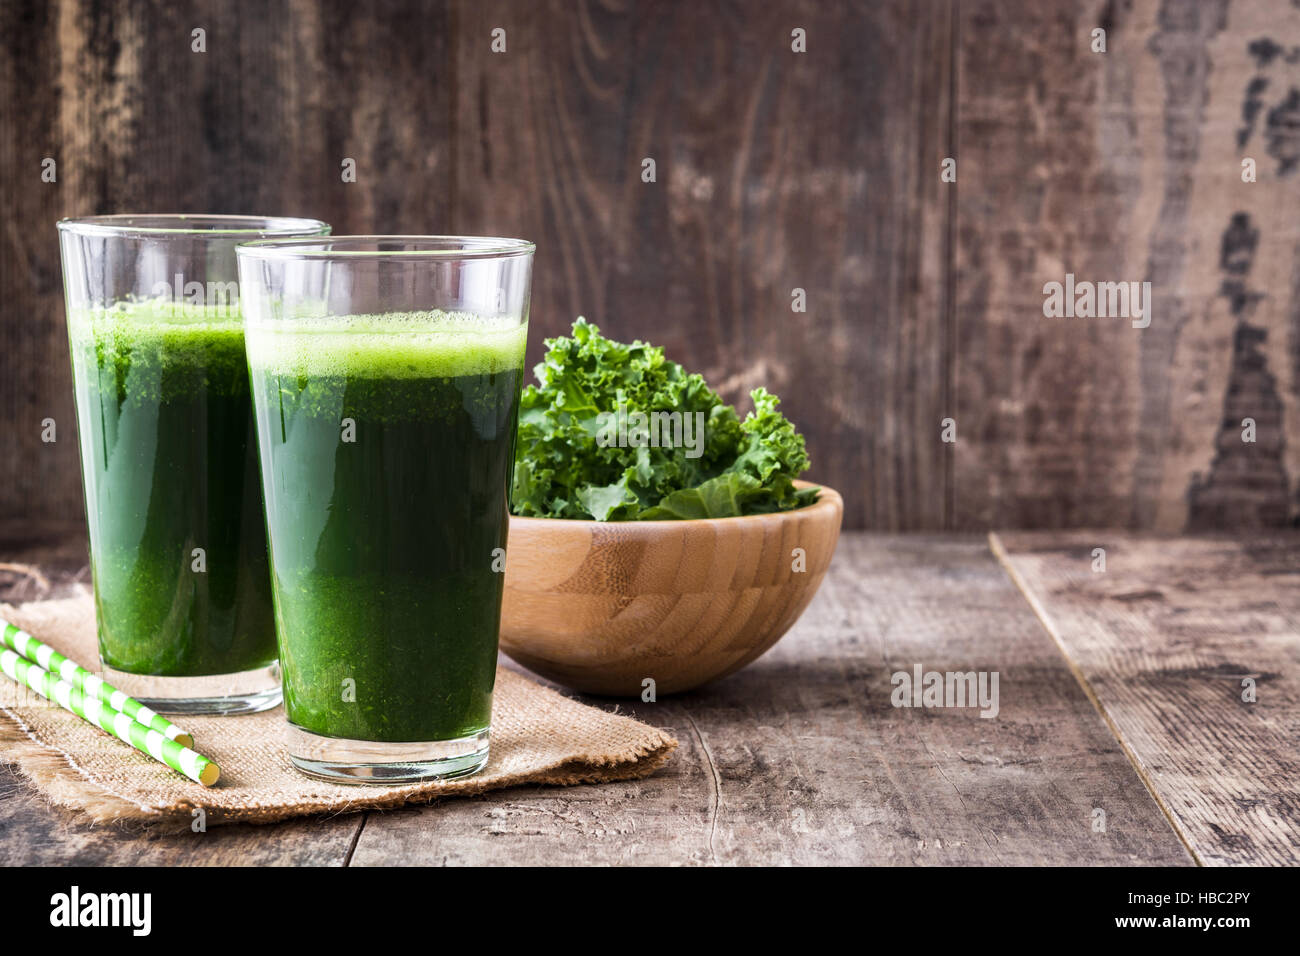 Kale smoothie in glass on wooden background.Copyspace Stock Photo - Alamy